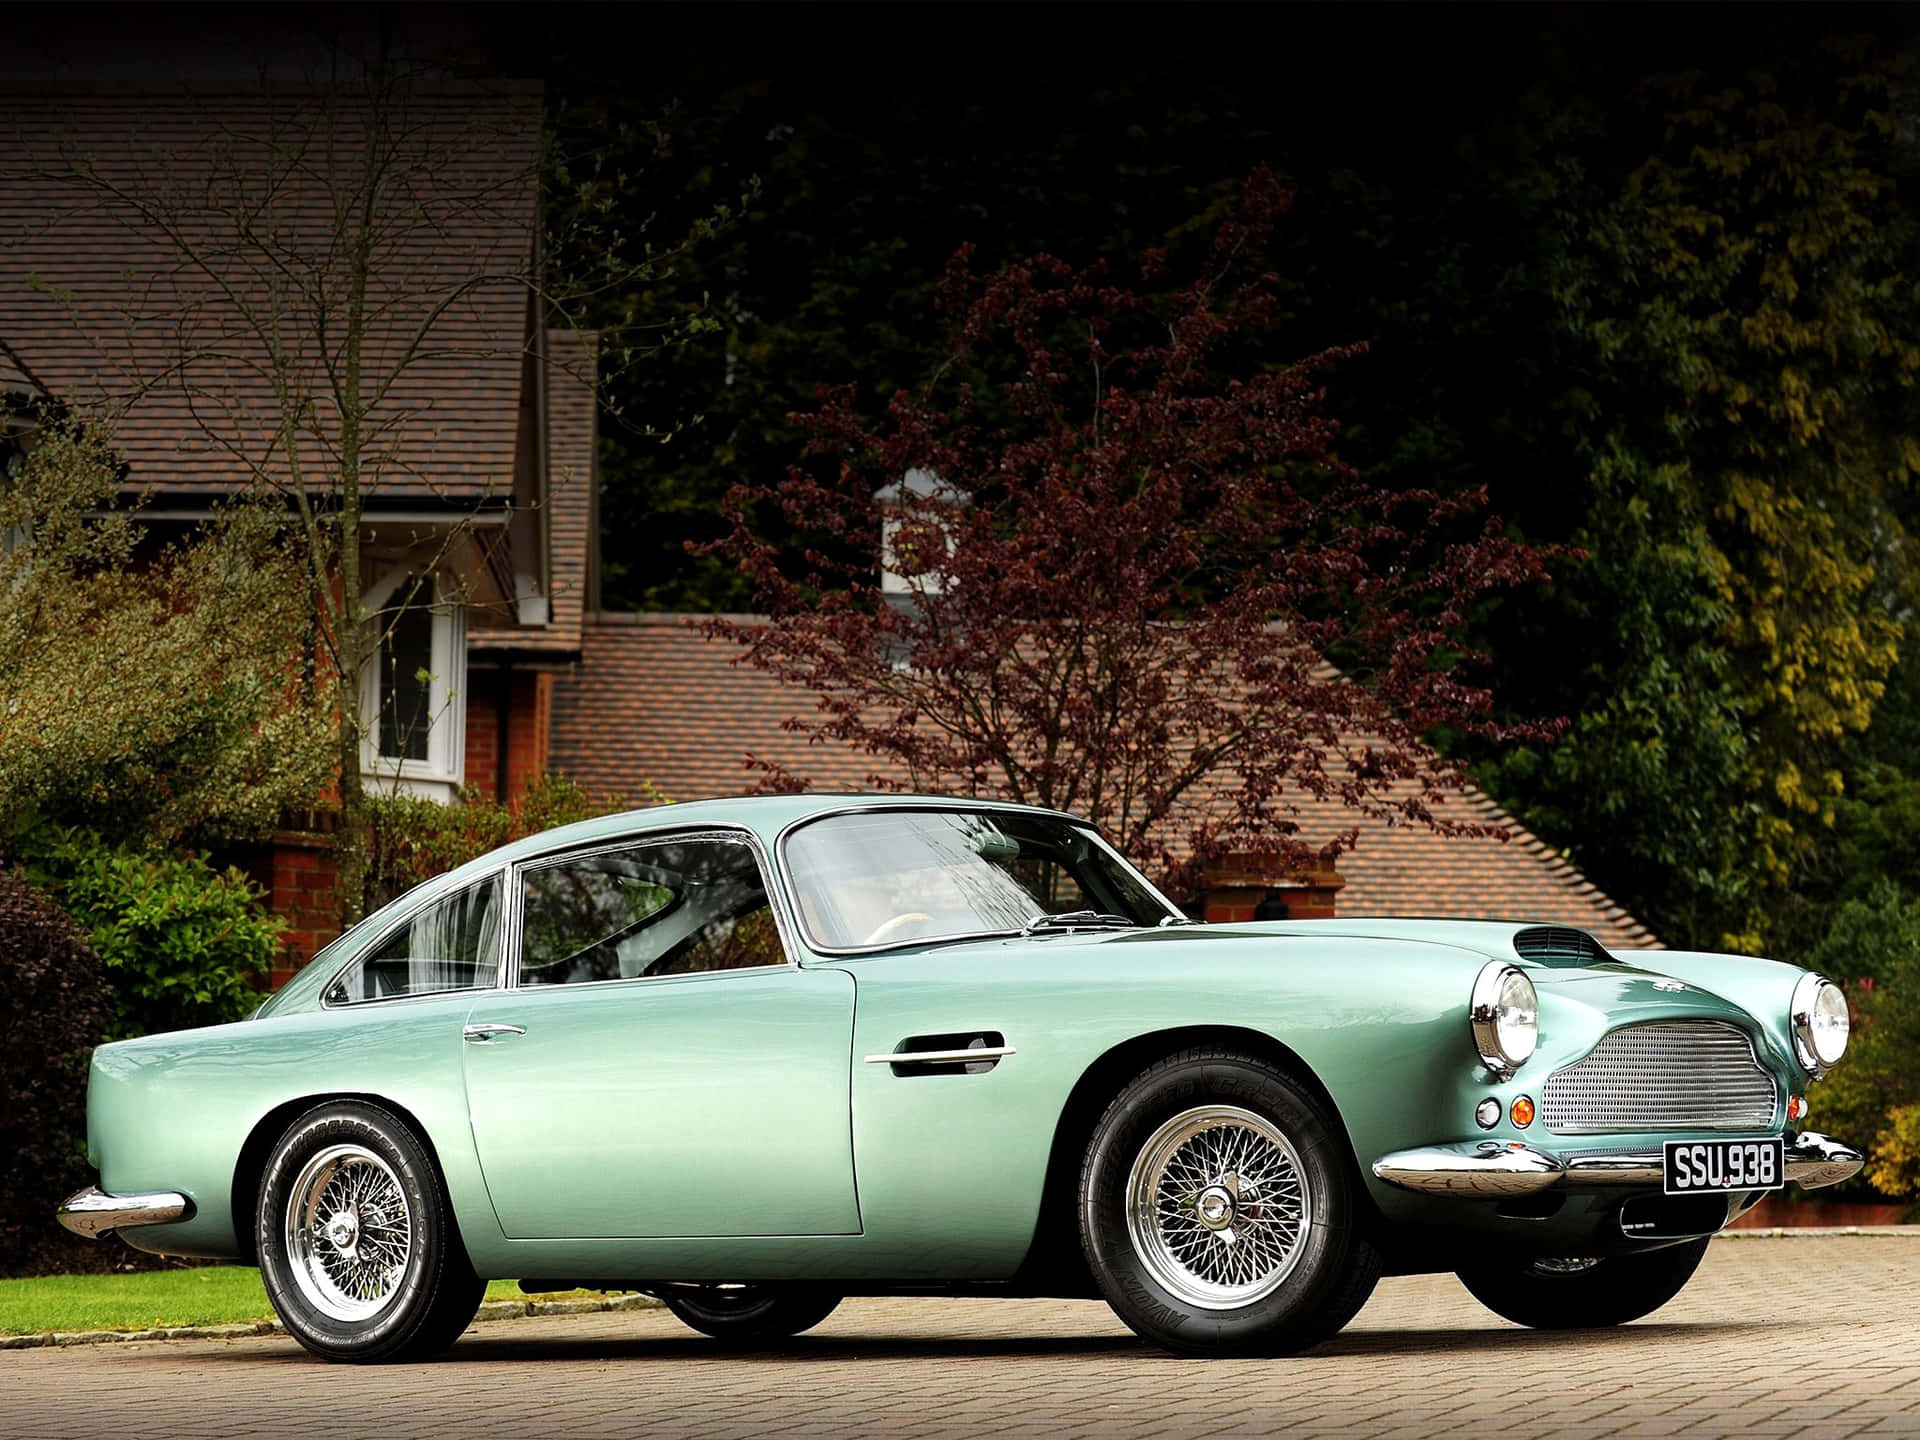 A Green Aston Martin Db5 Parked In Front Of A House Wallpaper